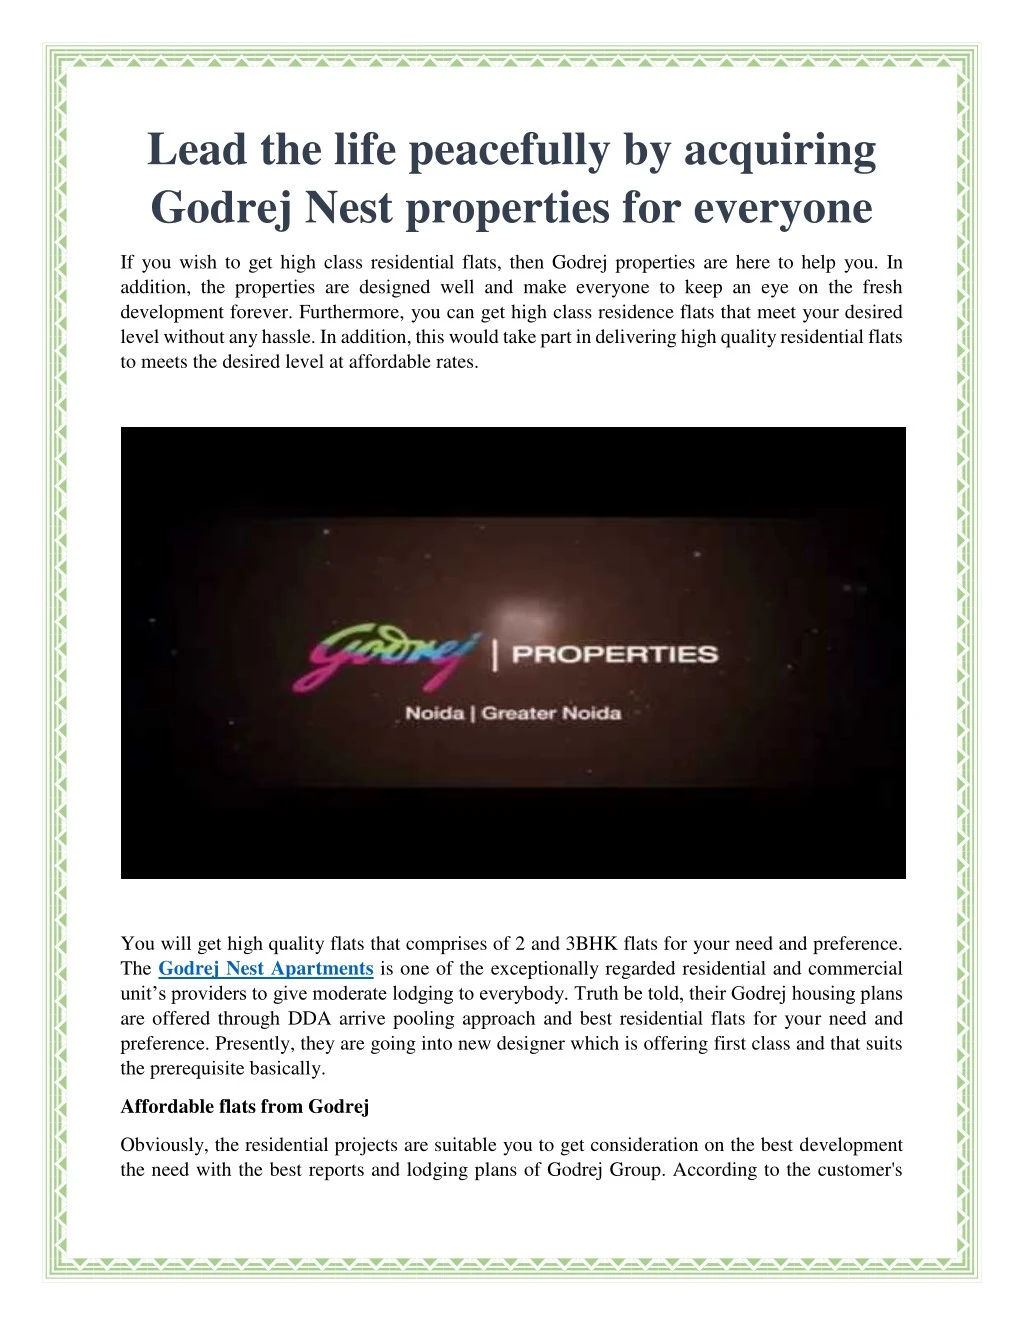 lead the life peacefully by acquiring godrej nest